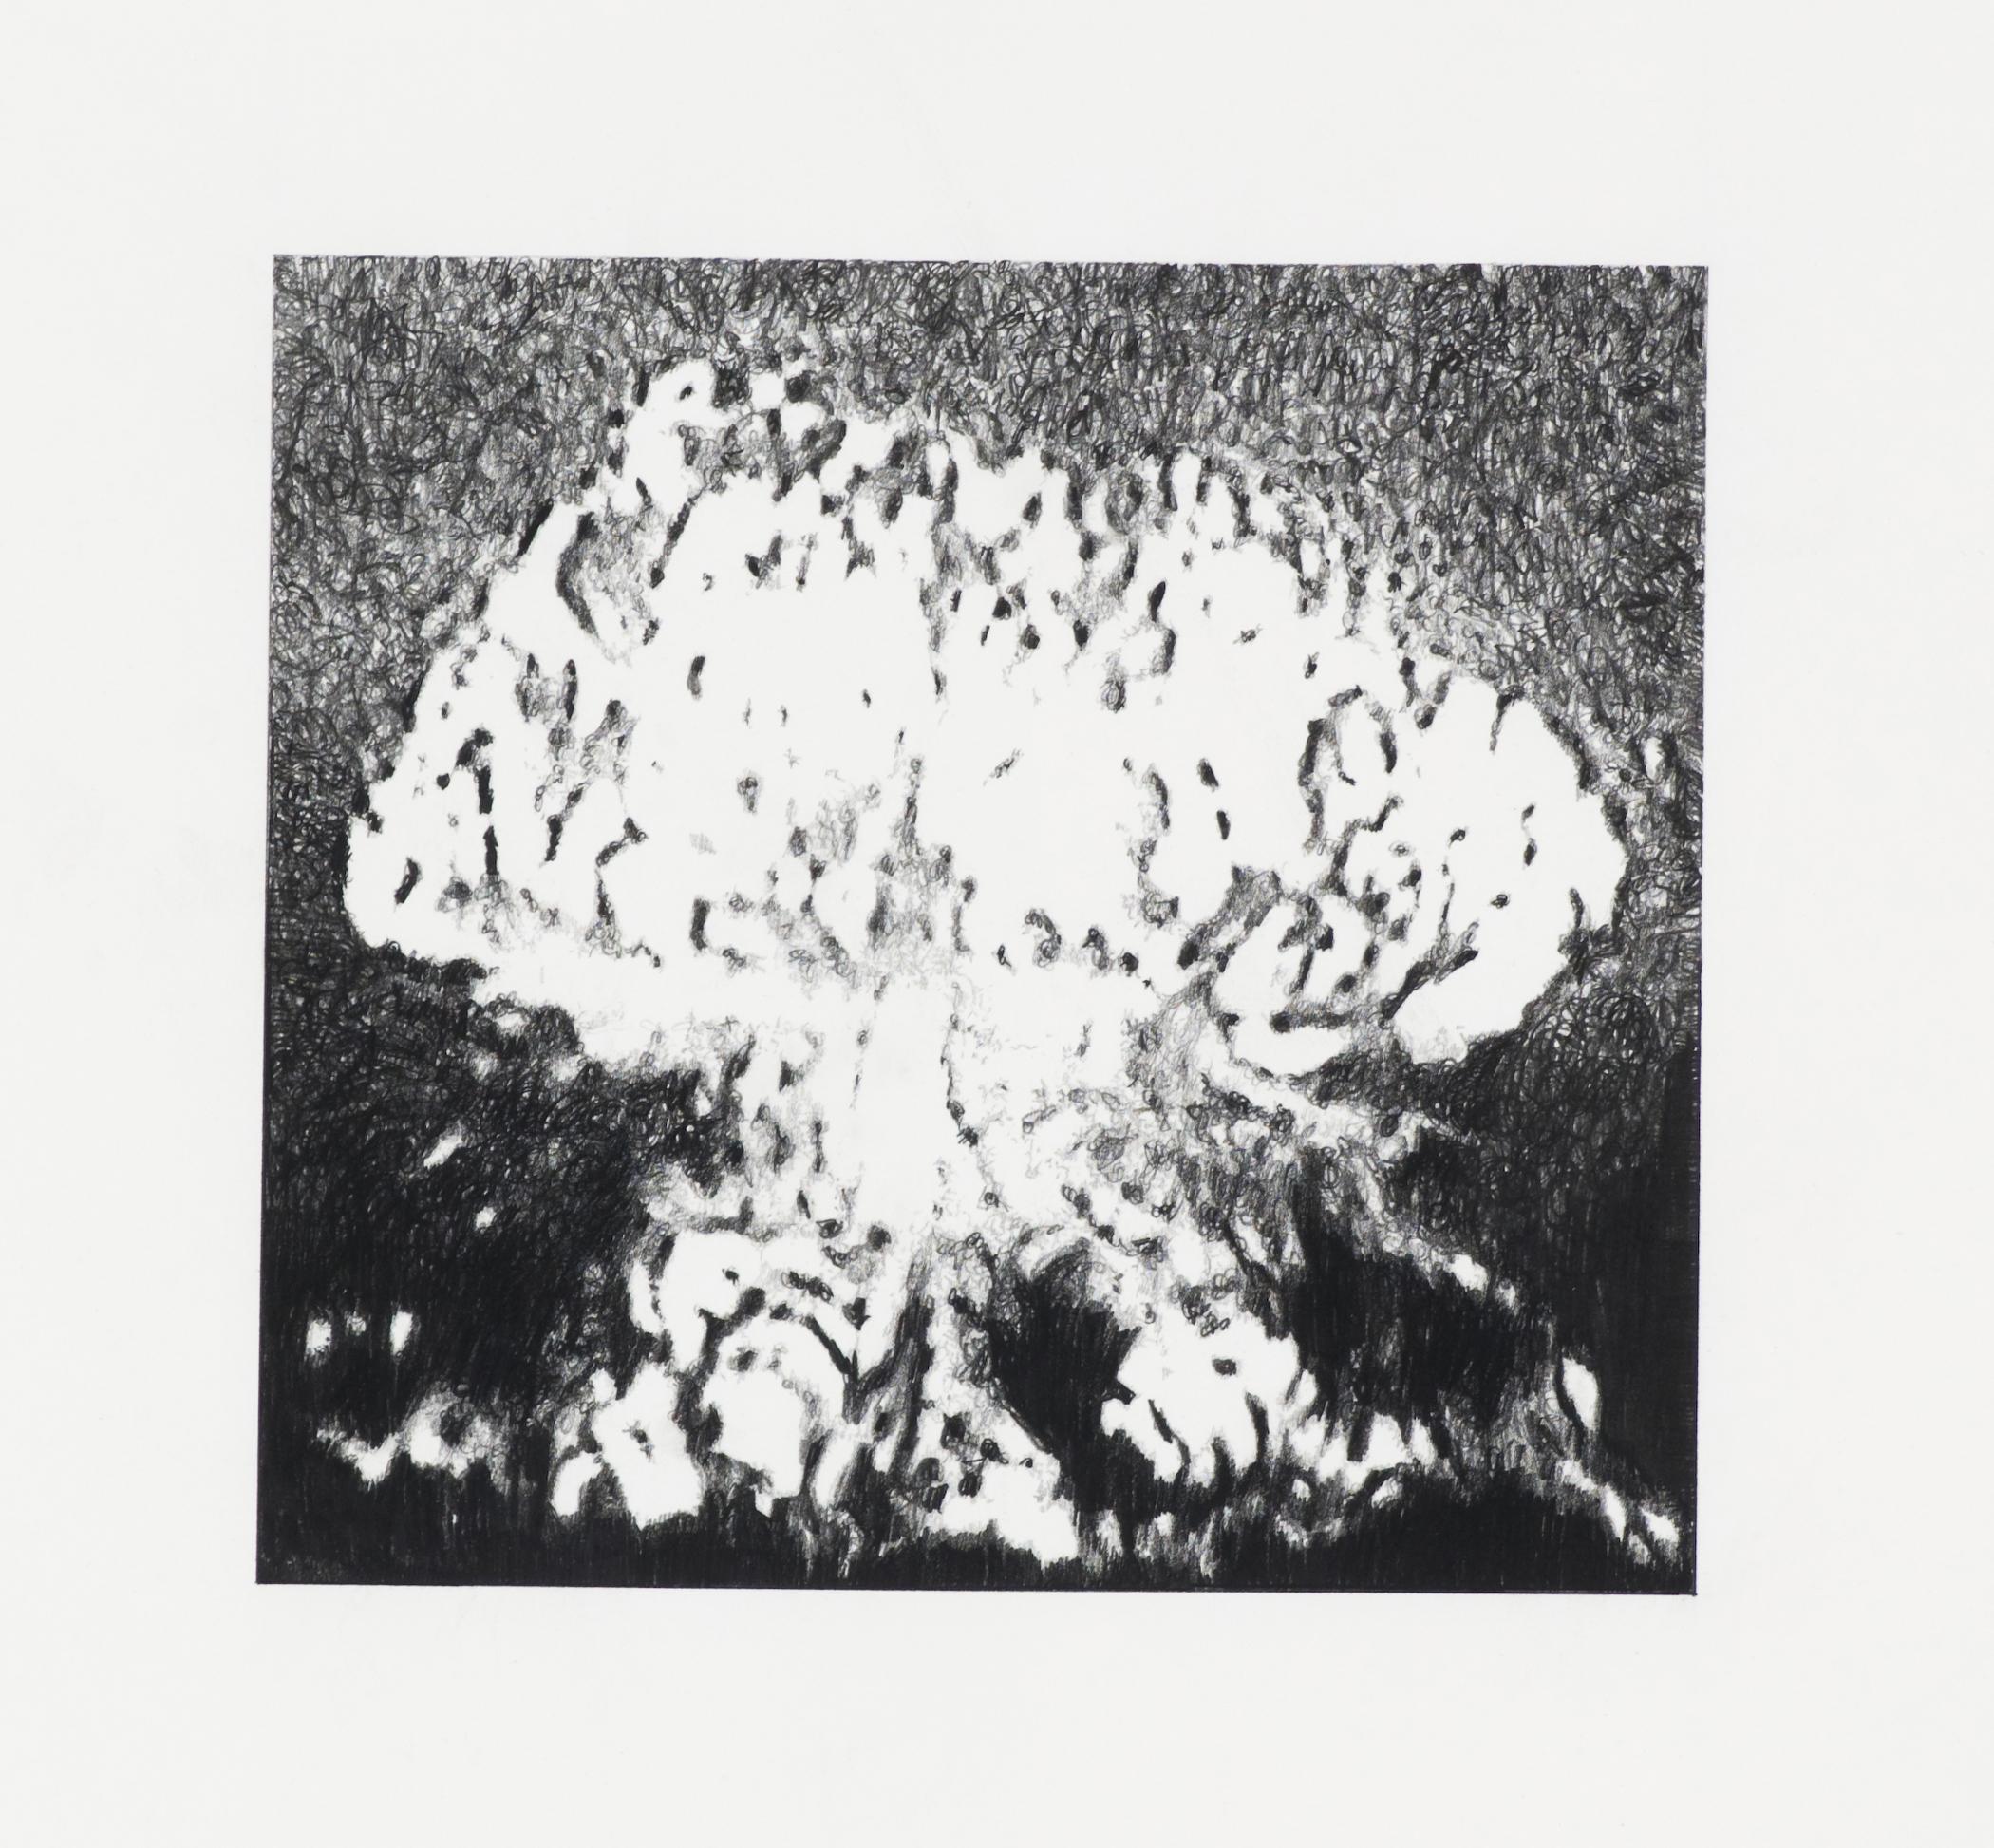 A blurry black-and-white sketch shows what might be a mushroom cloud, mid-explosion.